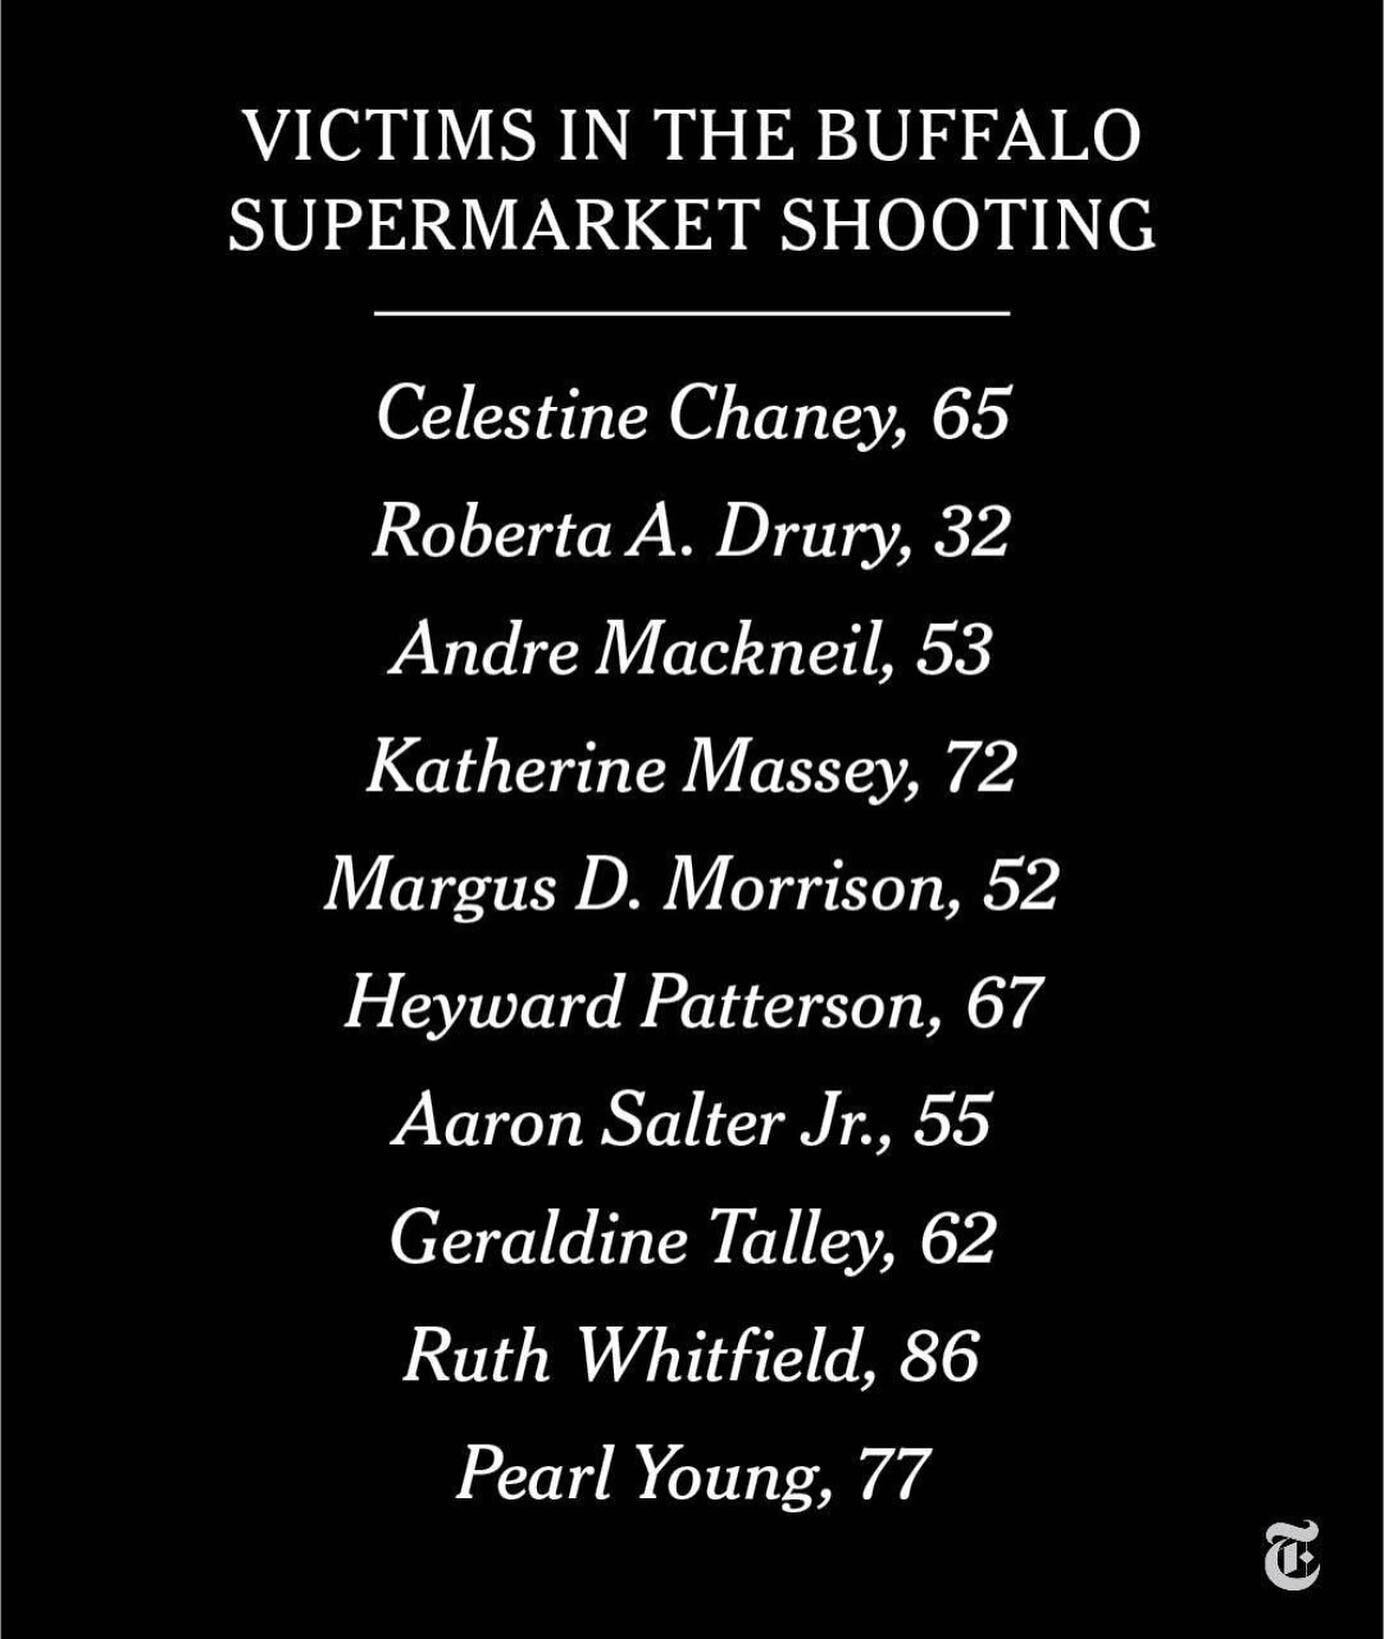 SAY THEIR NAMES 🗣
.
.
.
.
Tragedies like this one remind us that we still have so much more work to do. To hear about a racially motivated hate crime against black people in 2022 is disheartening. We stand on the side of equality and justice. Please